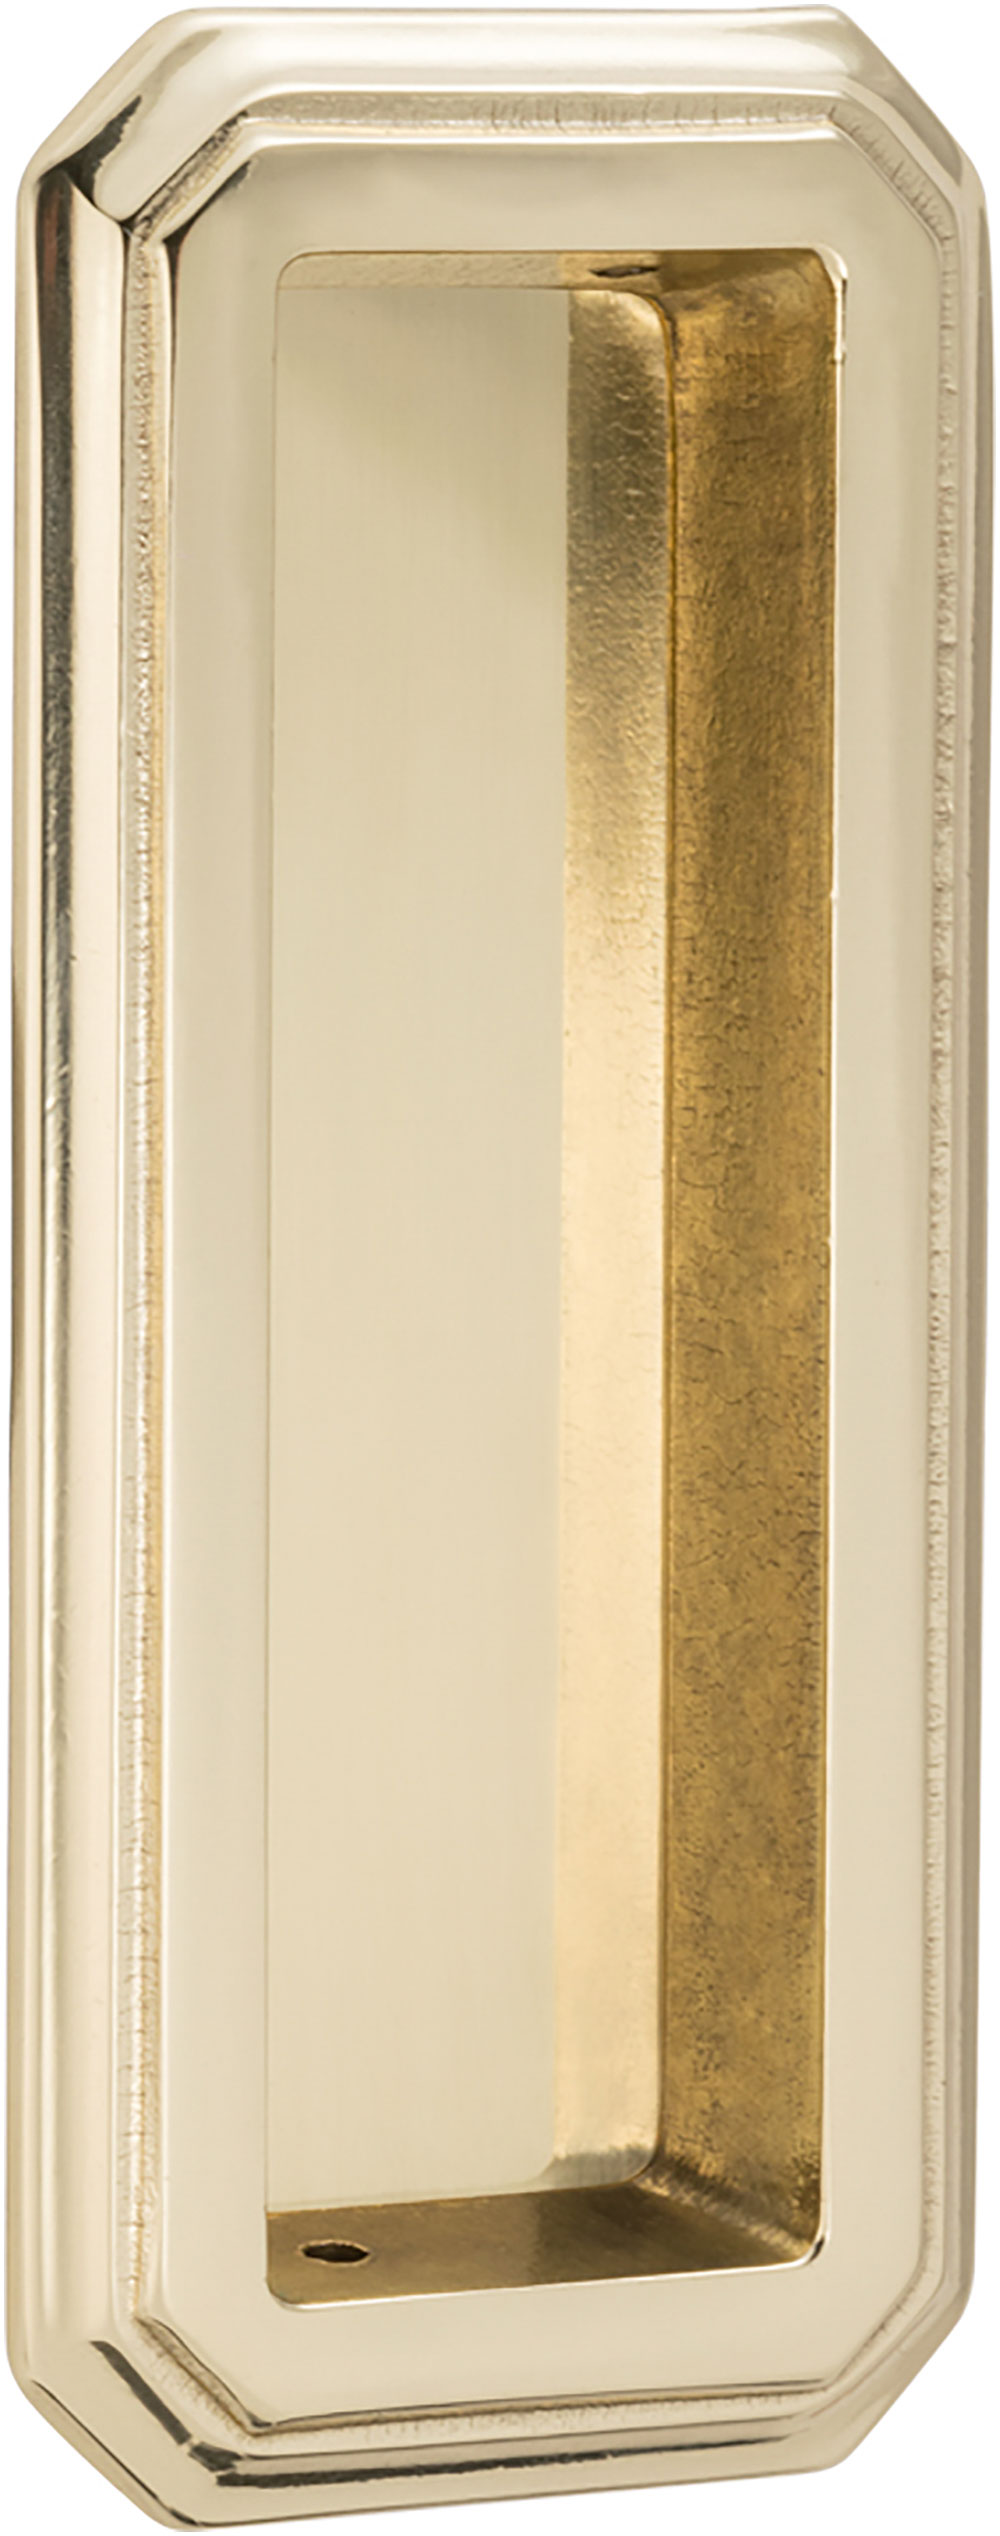 Item No.654 (US3 Polished Brass, Lacquered)